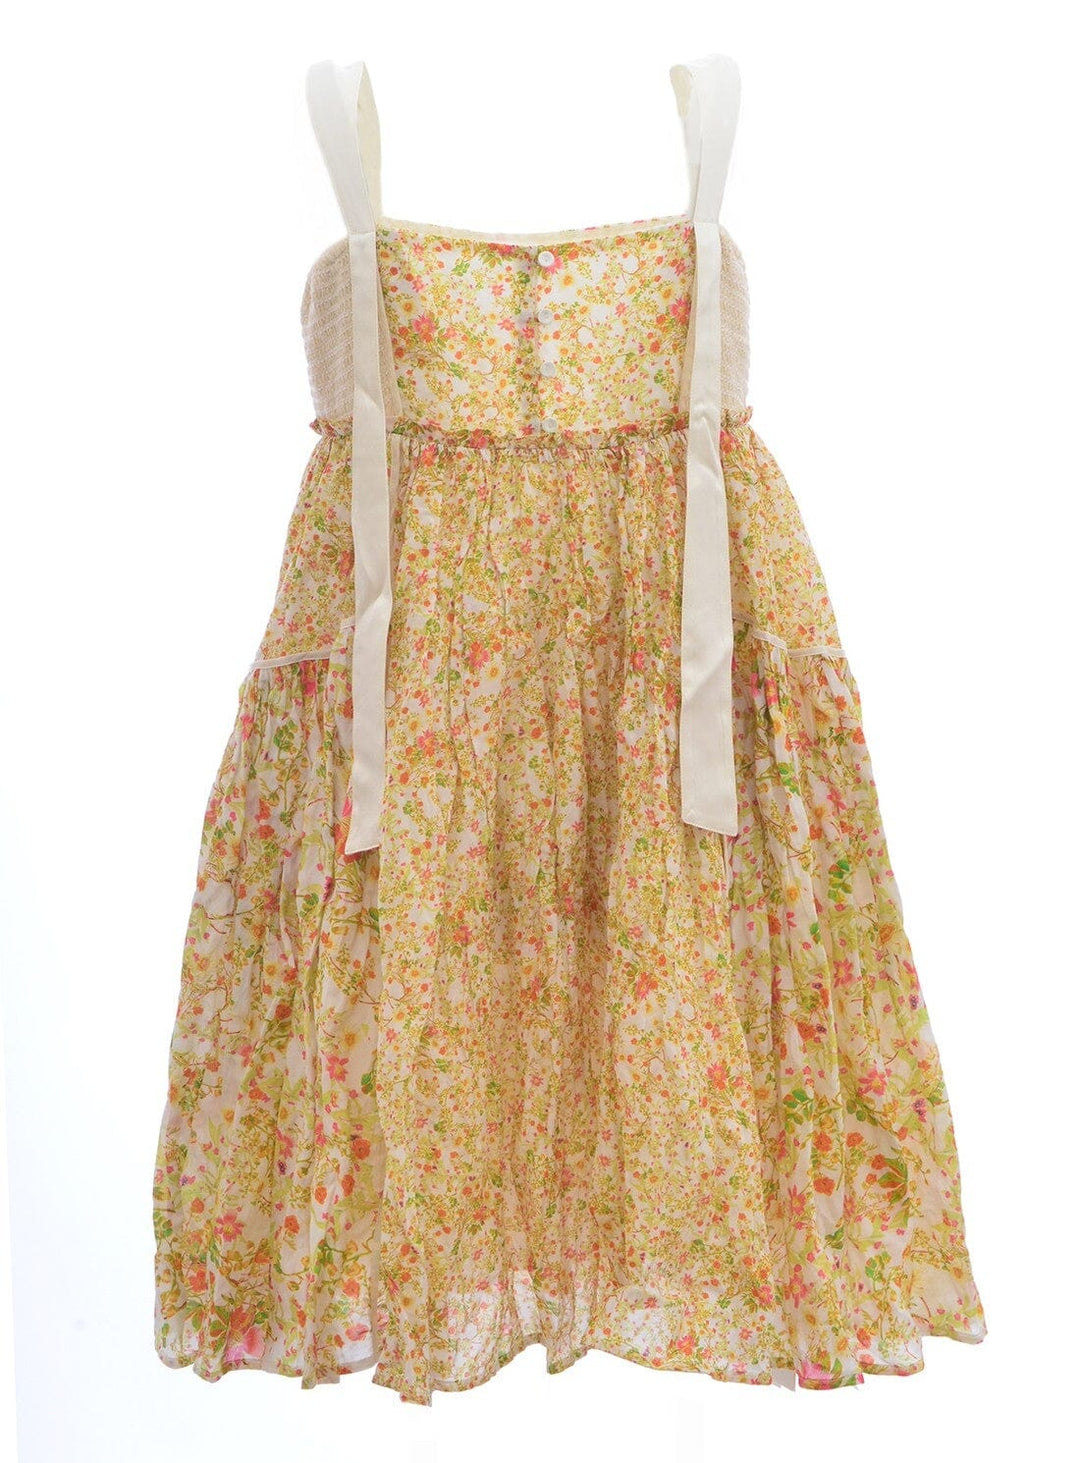 Ditsy Floral Cotton and Silk Dress Dresses YBDFinds 